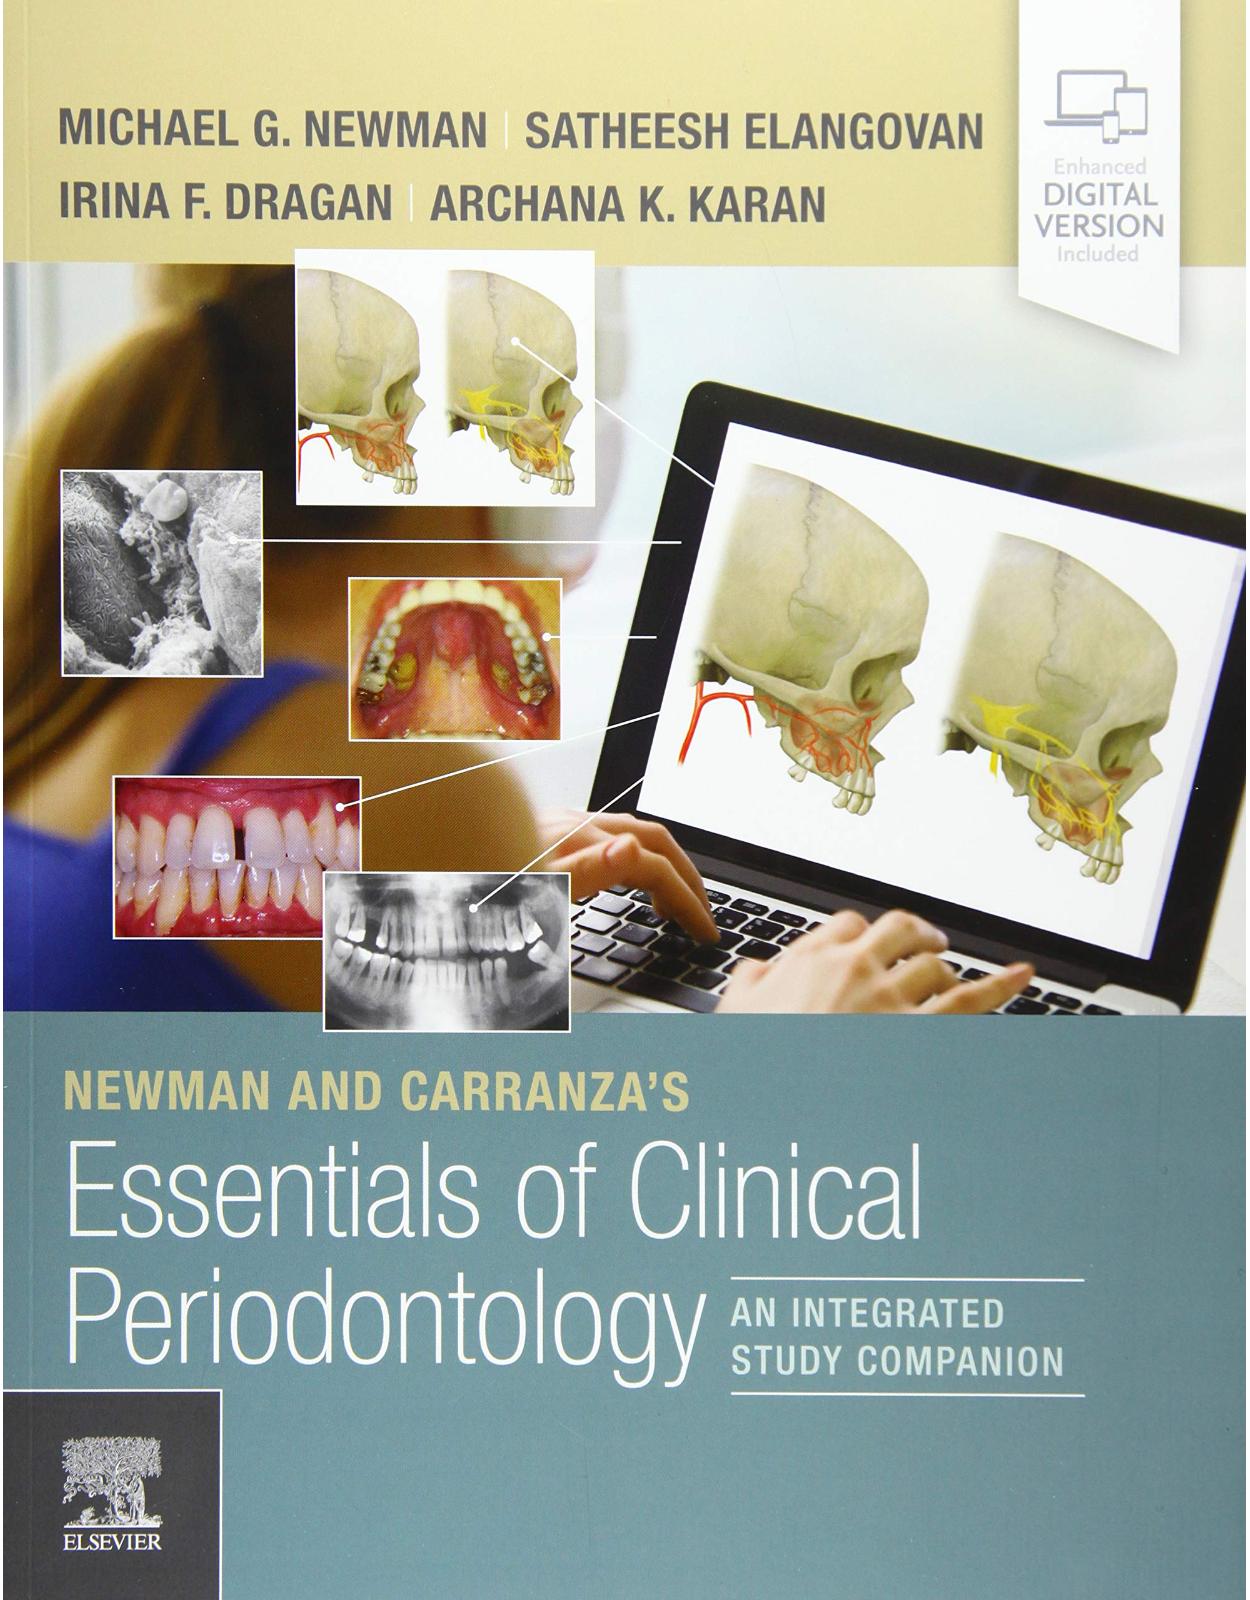 Newman and Carranza's Essentials of Clinical Periodontology: An Integrated Study Companion 